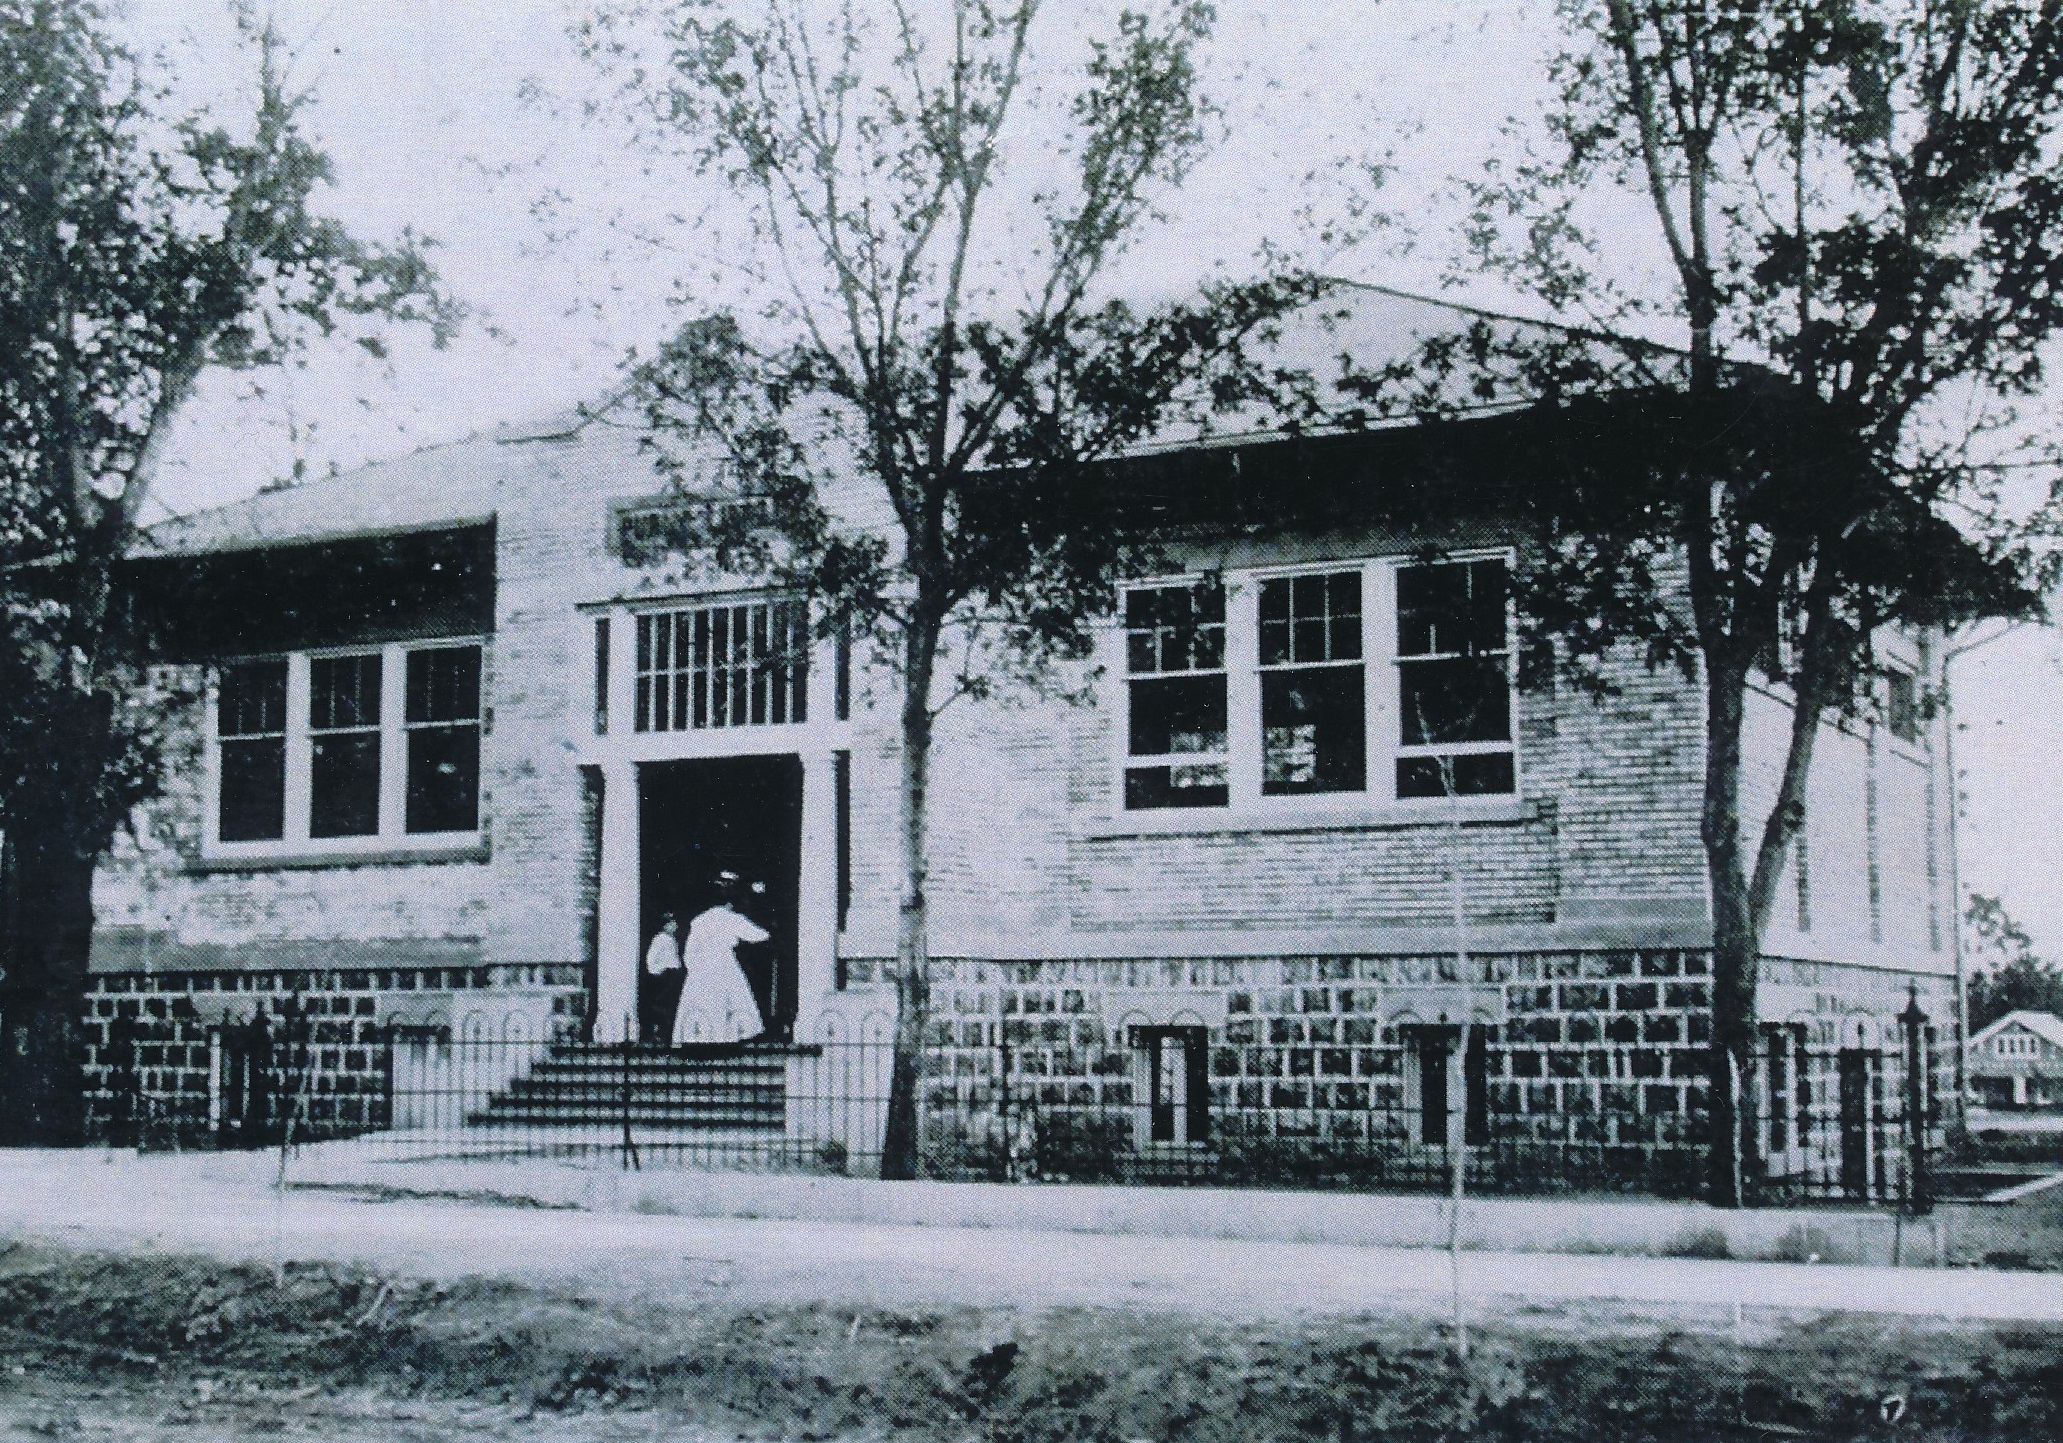 The old Carnegie Library Building